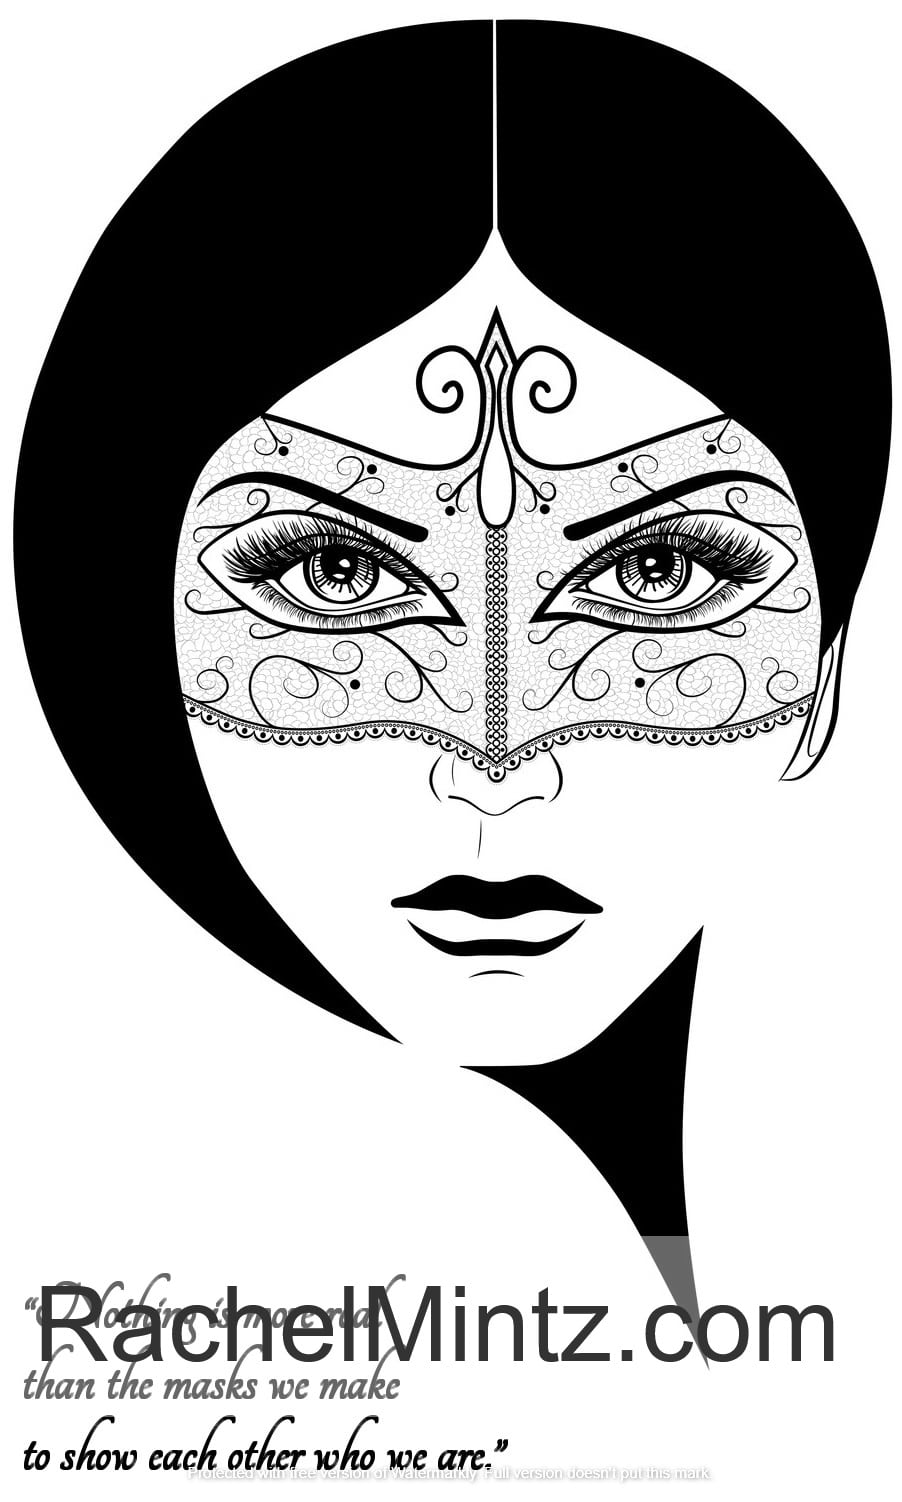 Venice Girls - Masks Coloring Book, Women in Carnival / Mardi Gras Decorated Mask Patterns (PDF Book)